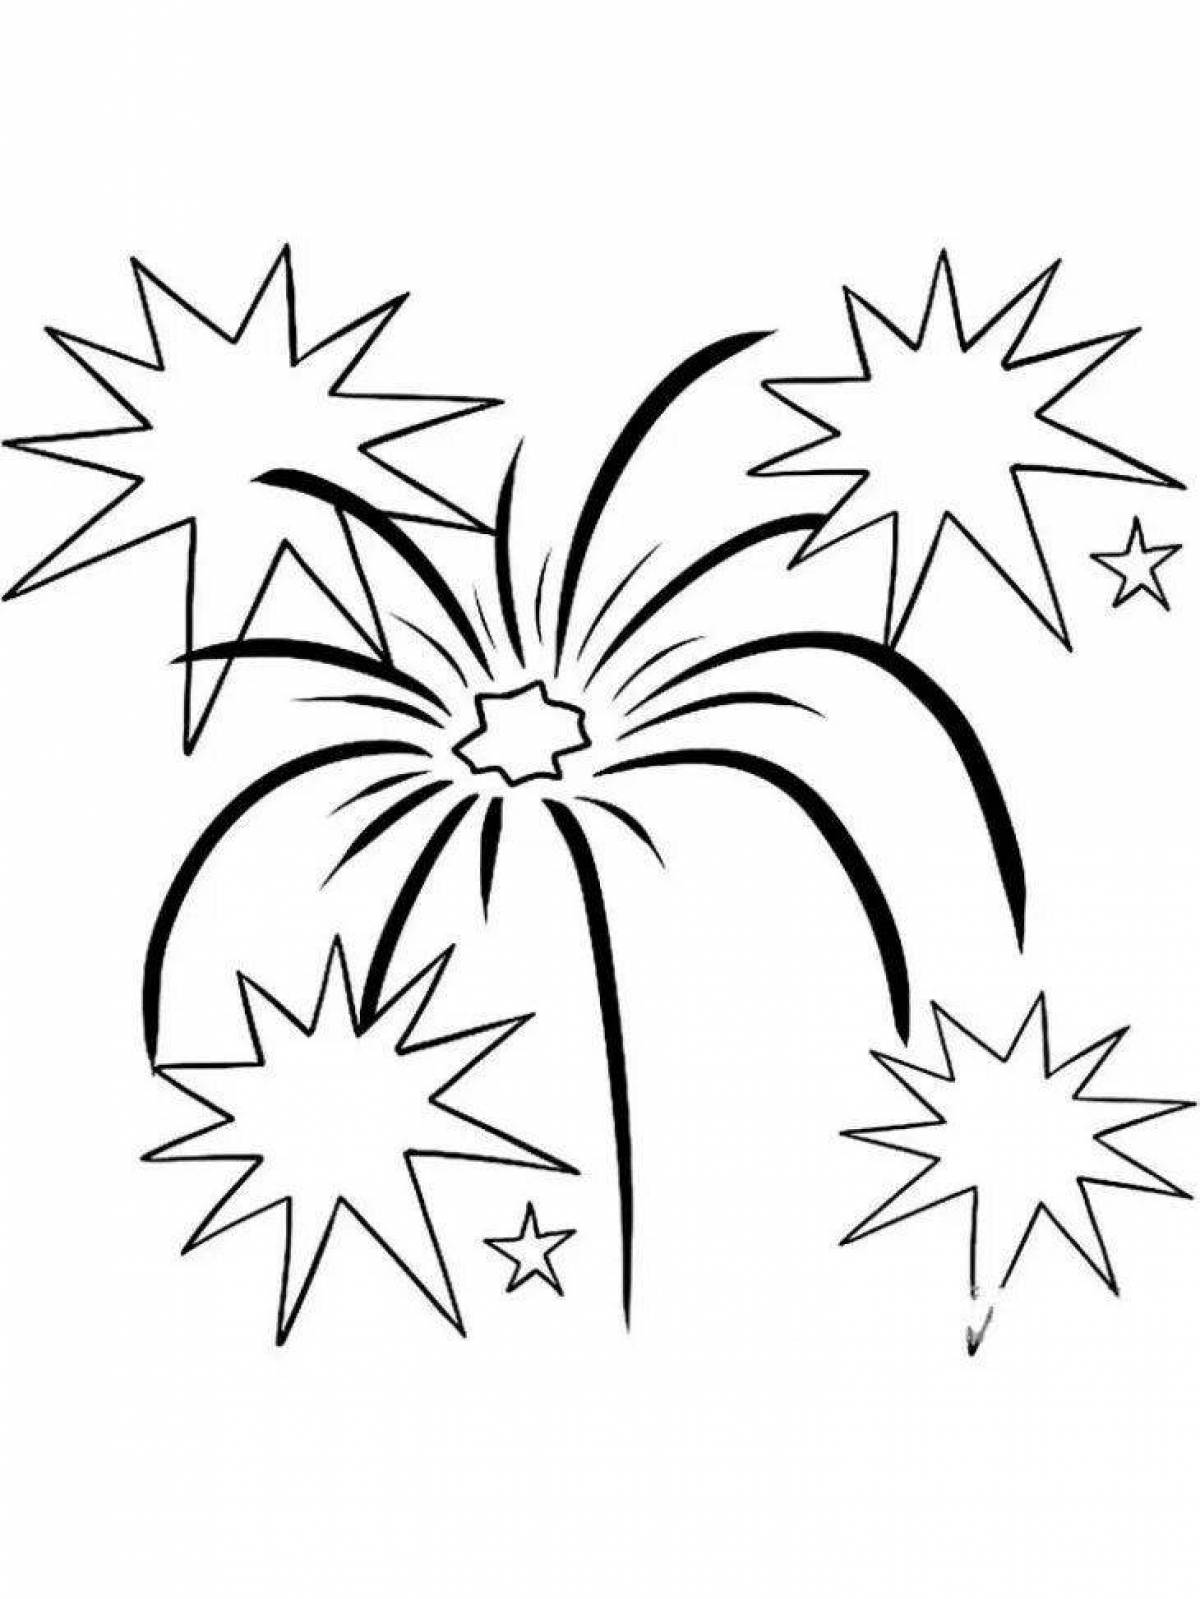 Children's fireworks coloring book for kids